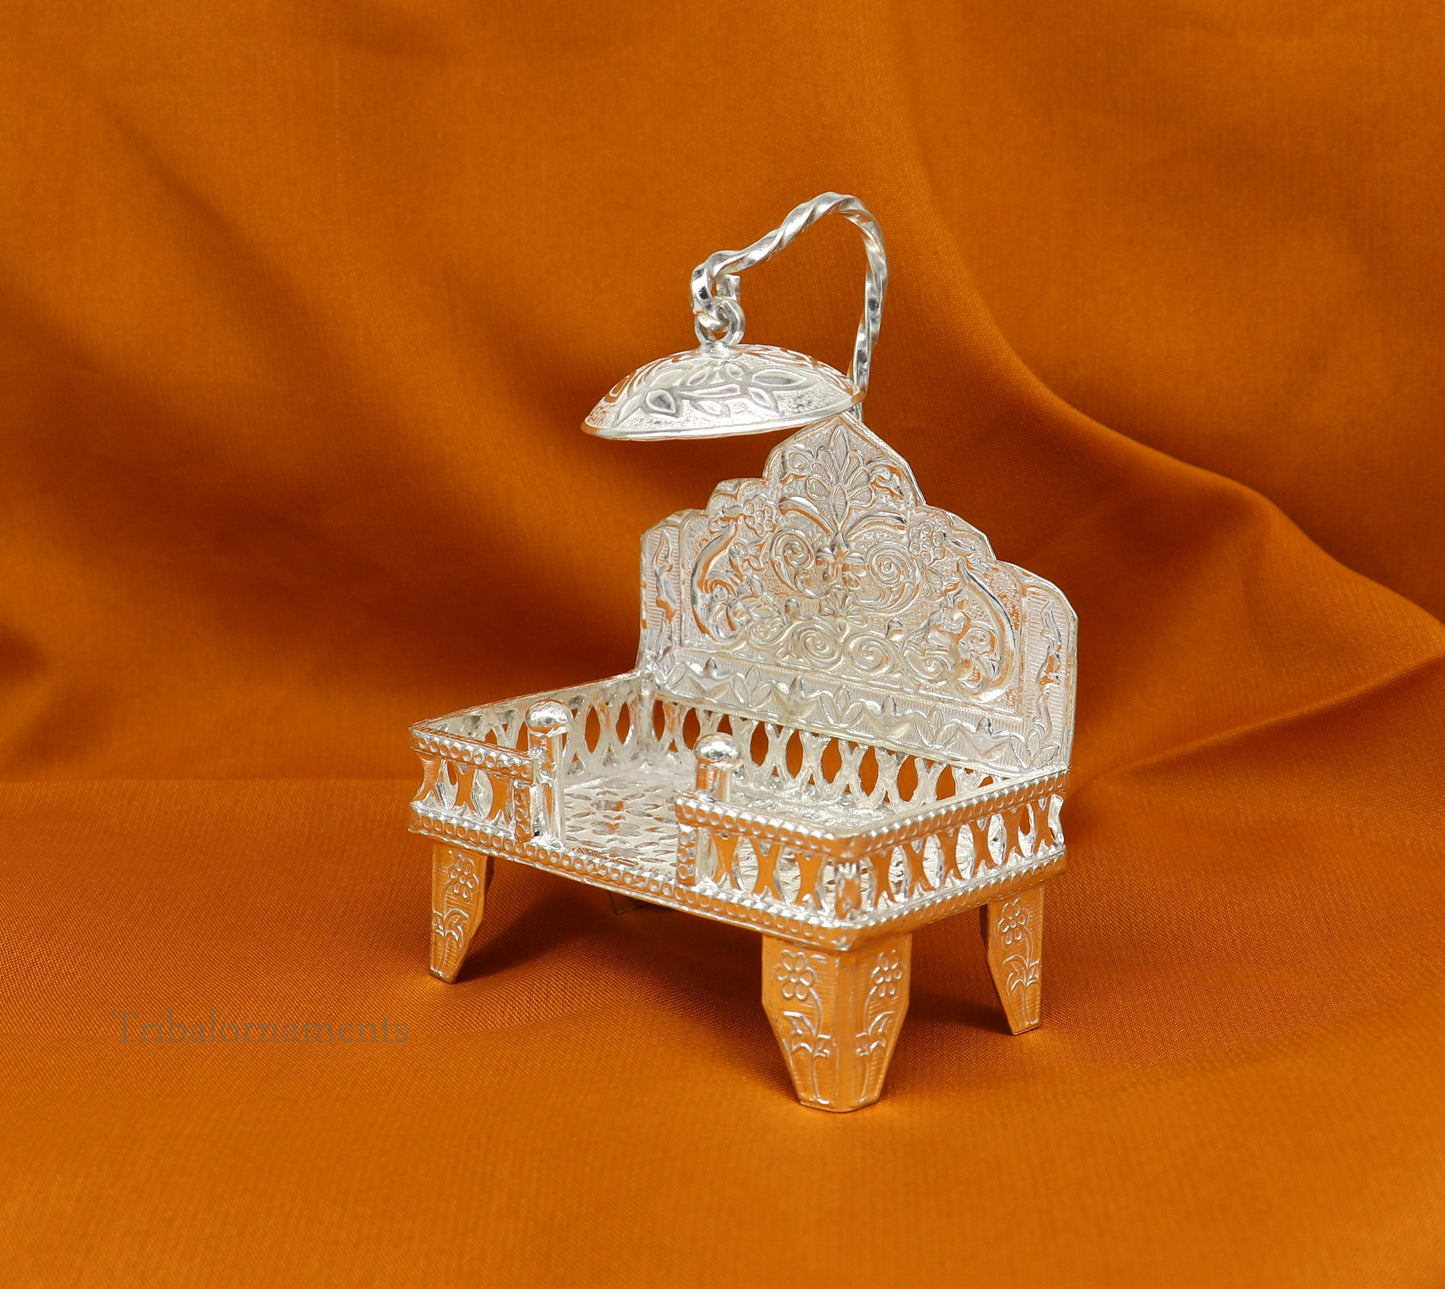 925 pure sterling silver handcrafted small singhasan, idol krishna Bal Gopala throne, god statue's stand chair, temple puja article su454 - TRIBAL ORNAMENTS